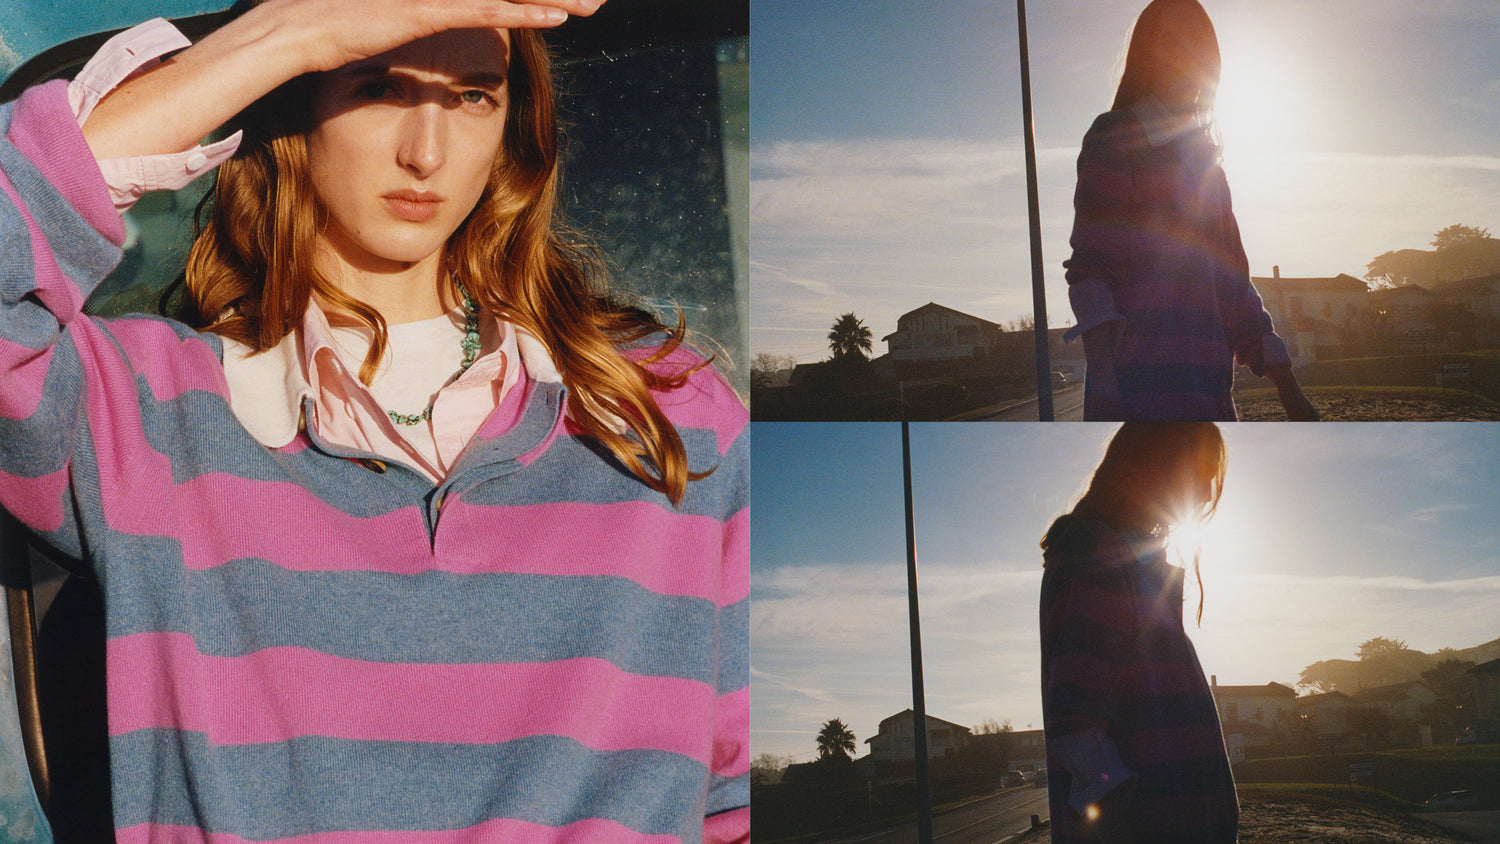 Close-up of a woman shielding her eyes from the sun in a polo rugby shirt patterned with denim blue and fuchsia stripes